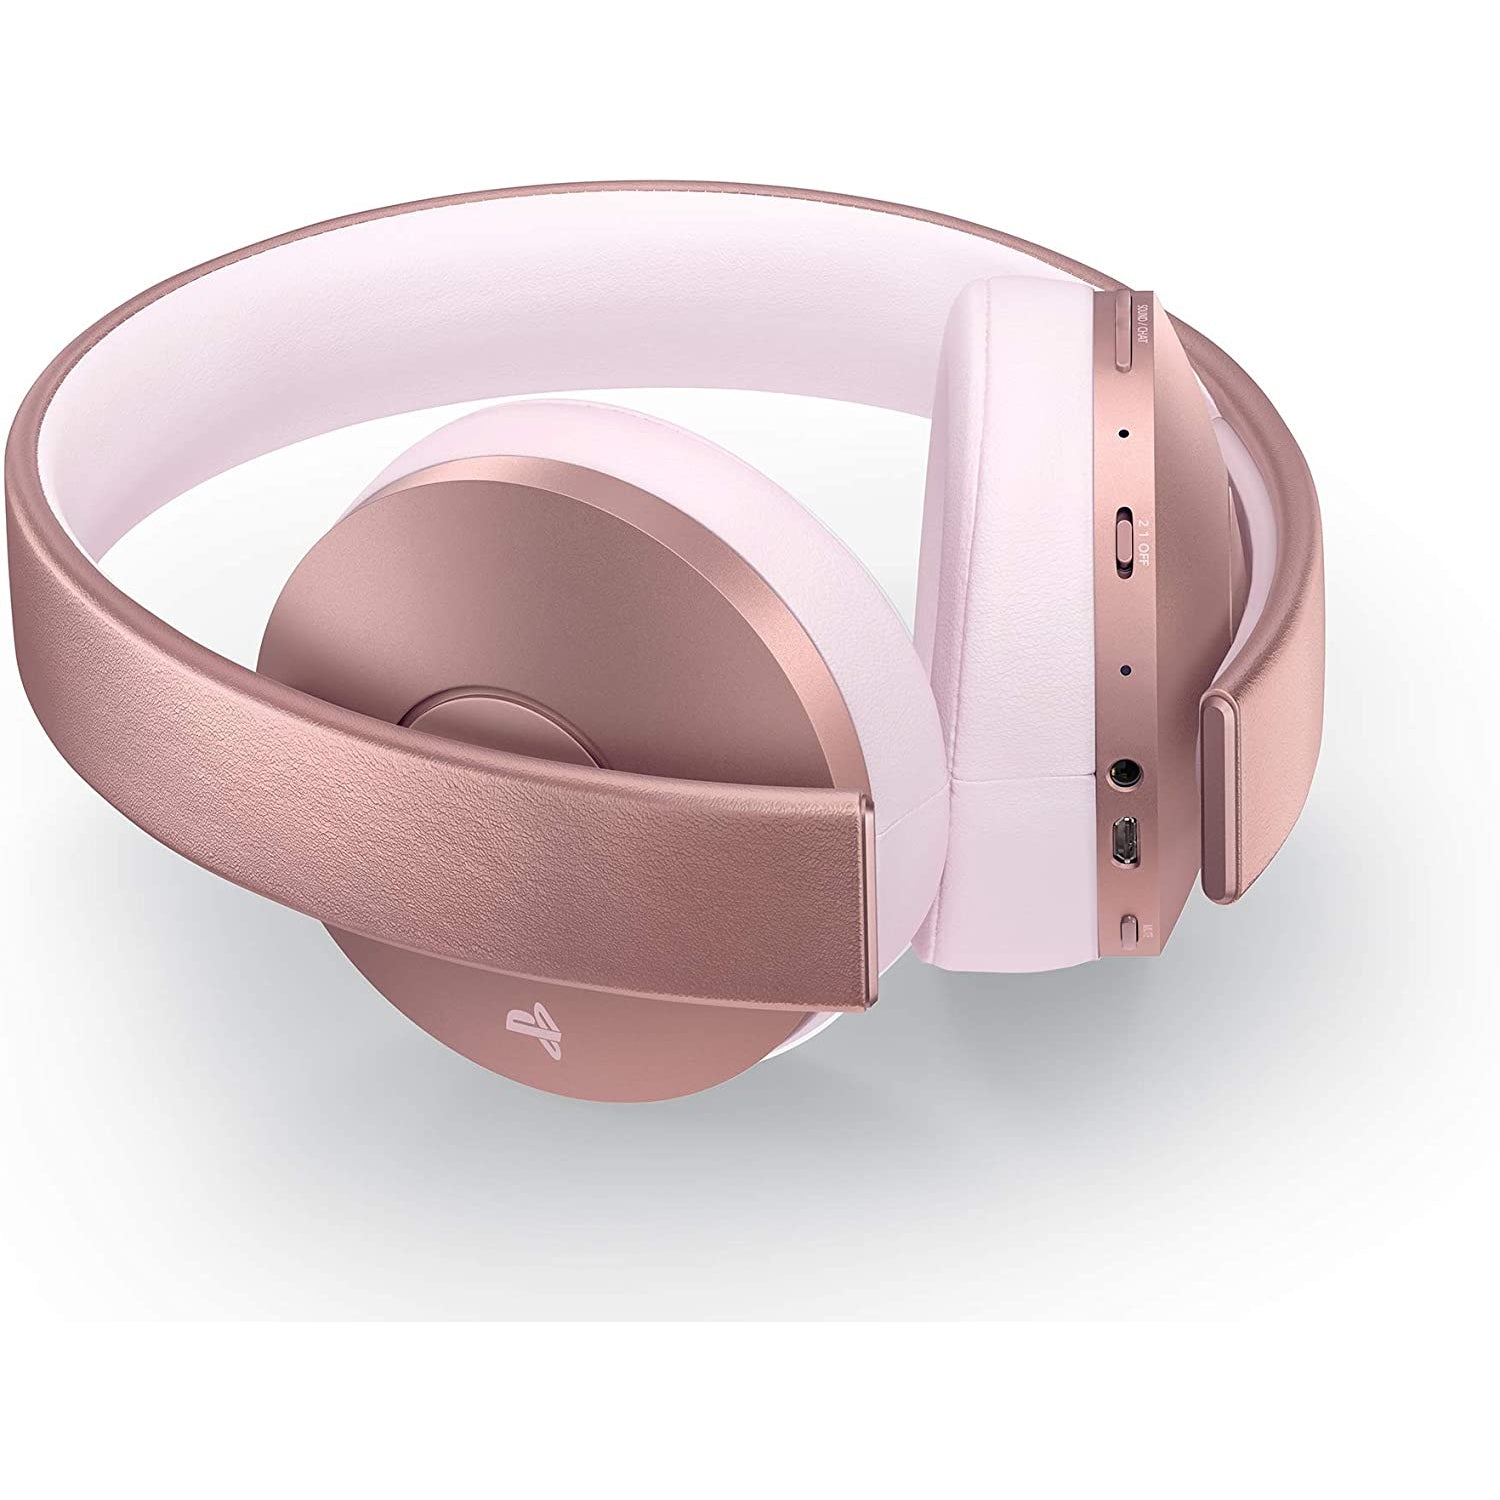 Sony Gold Wireless Headset, Rose Gold Edition (PS4)